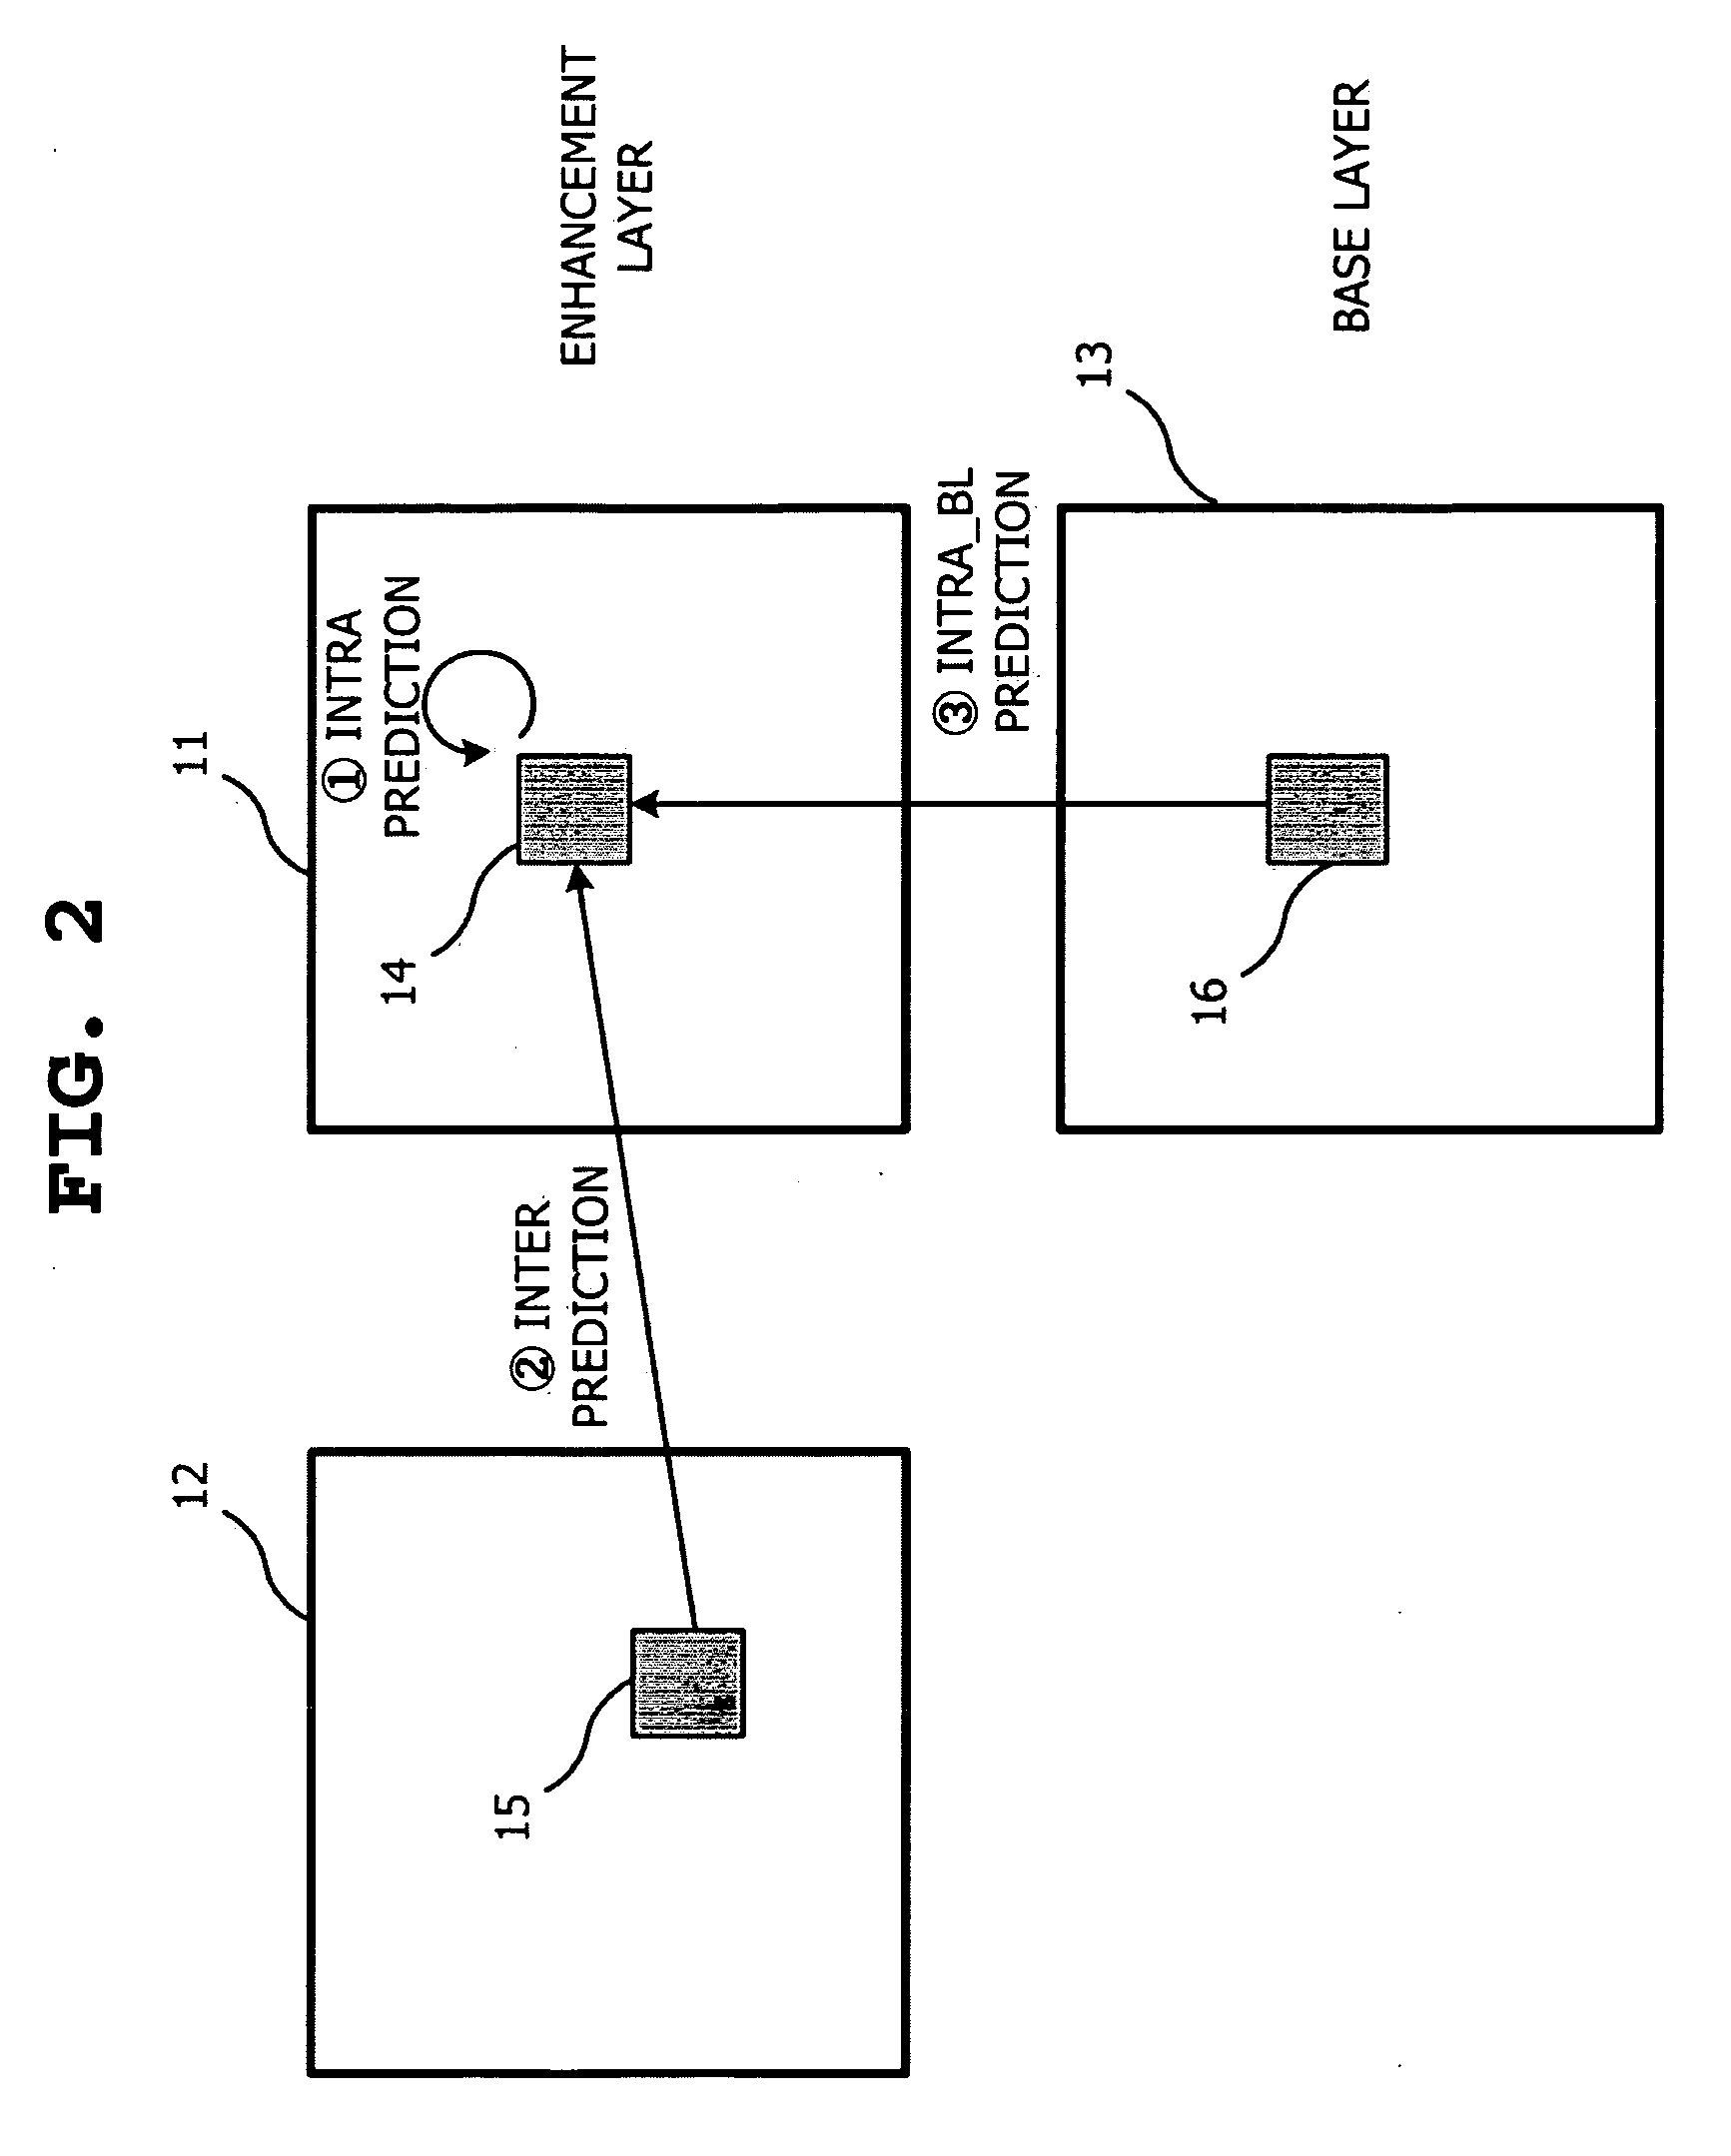 Video coding method and apparatus for efficiently predicting unsynchronized frame